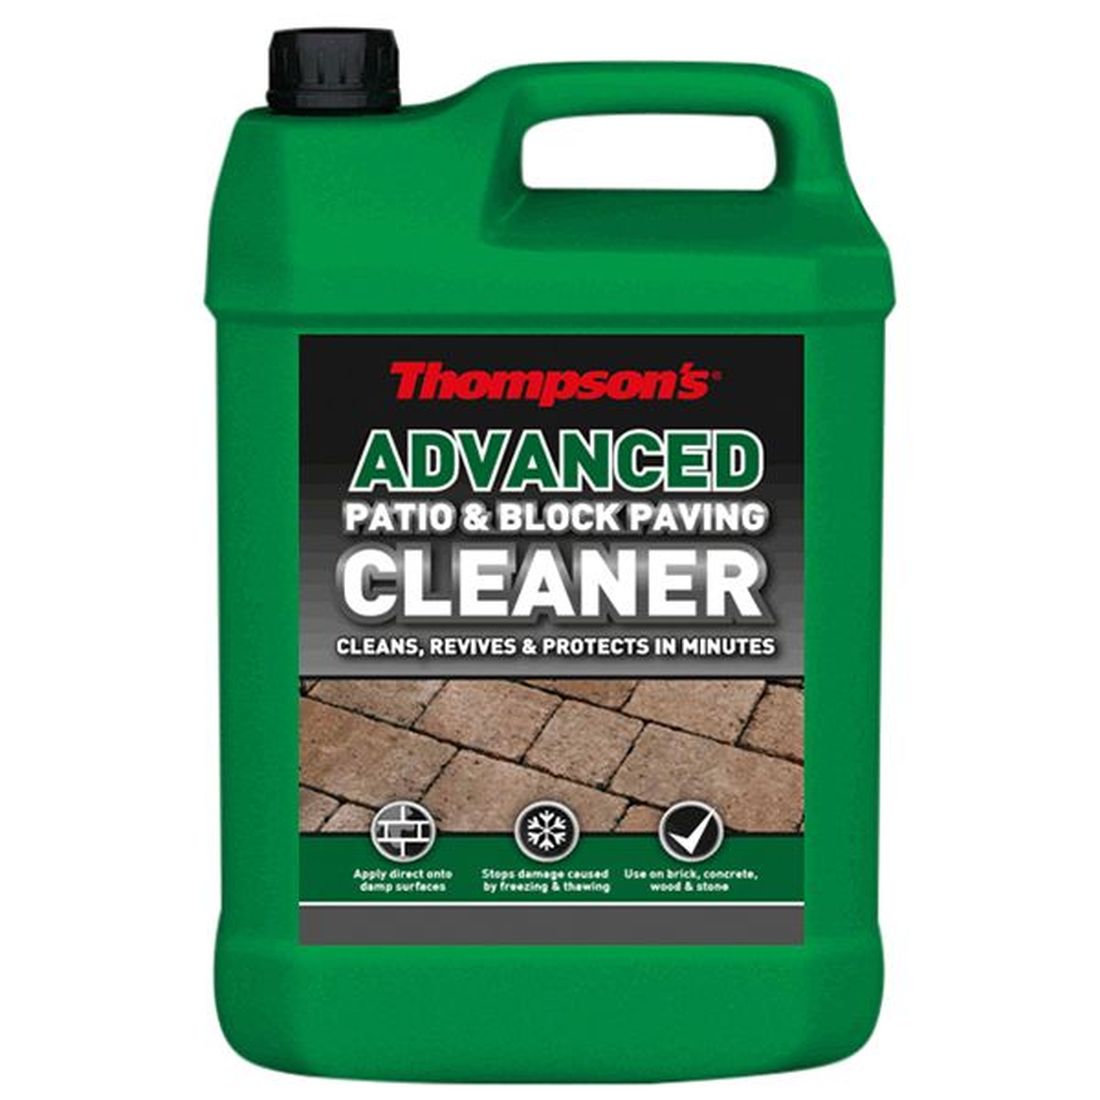 Ronseal Advanced Patio & Block Paving Cleaner 5 litre                                   